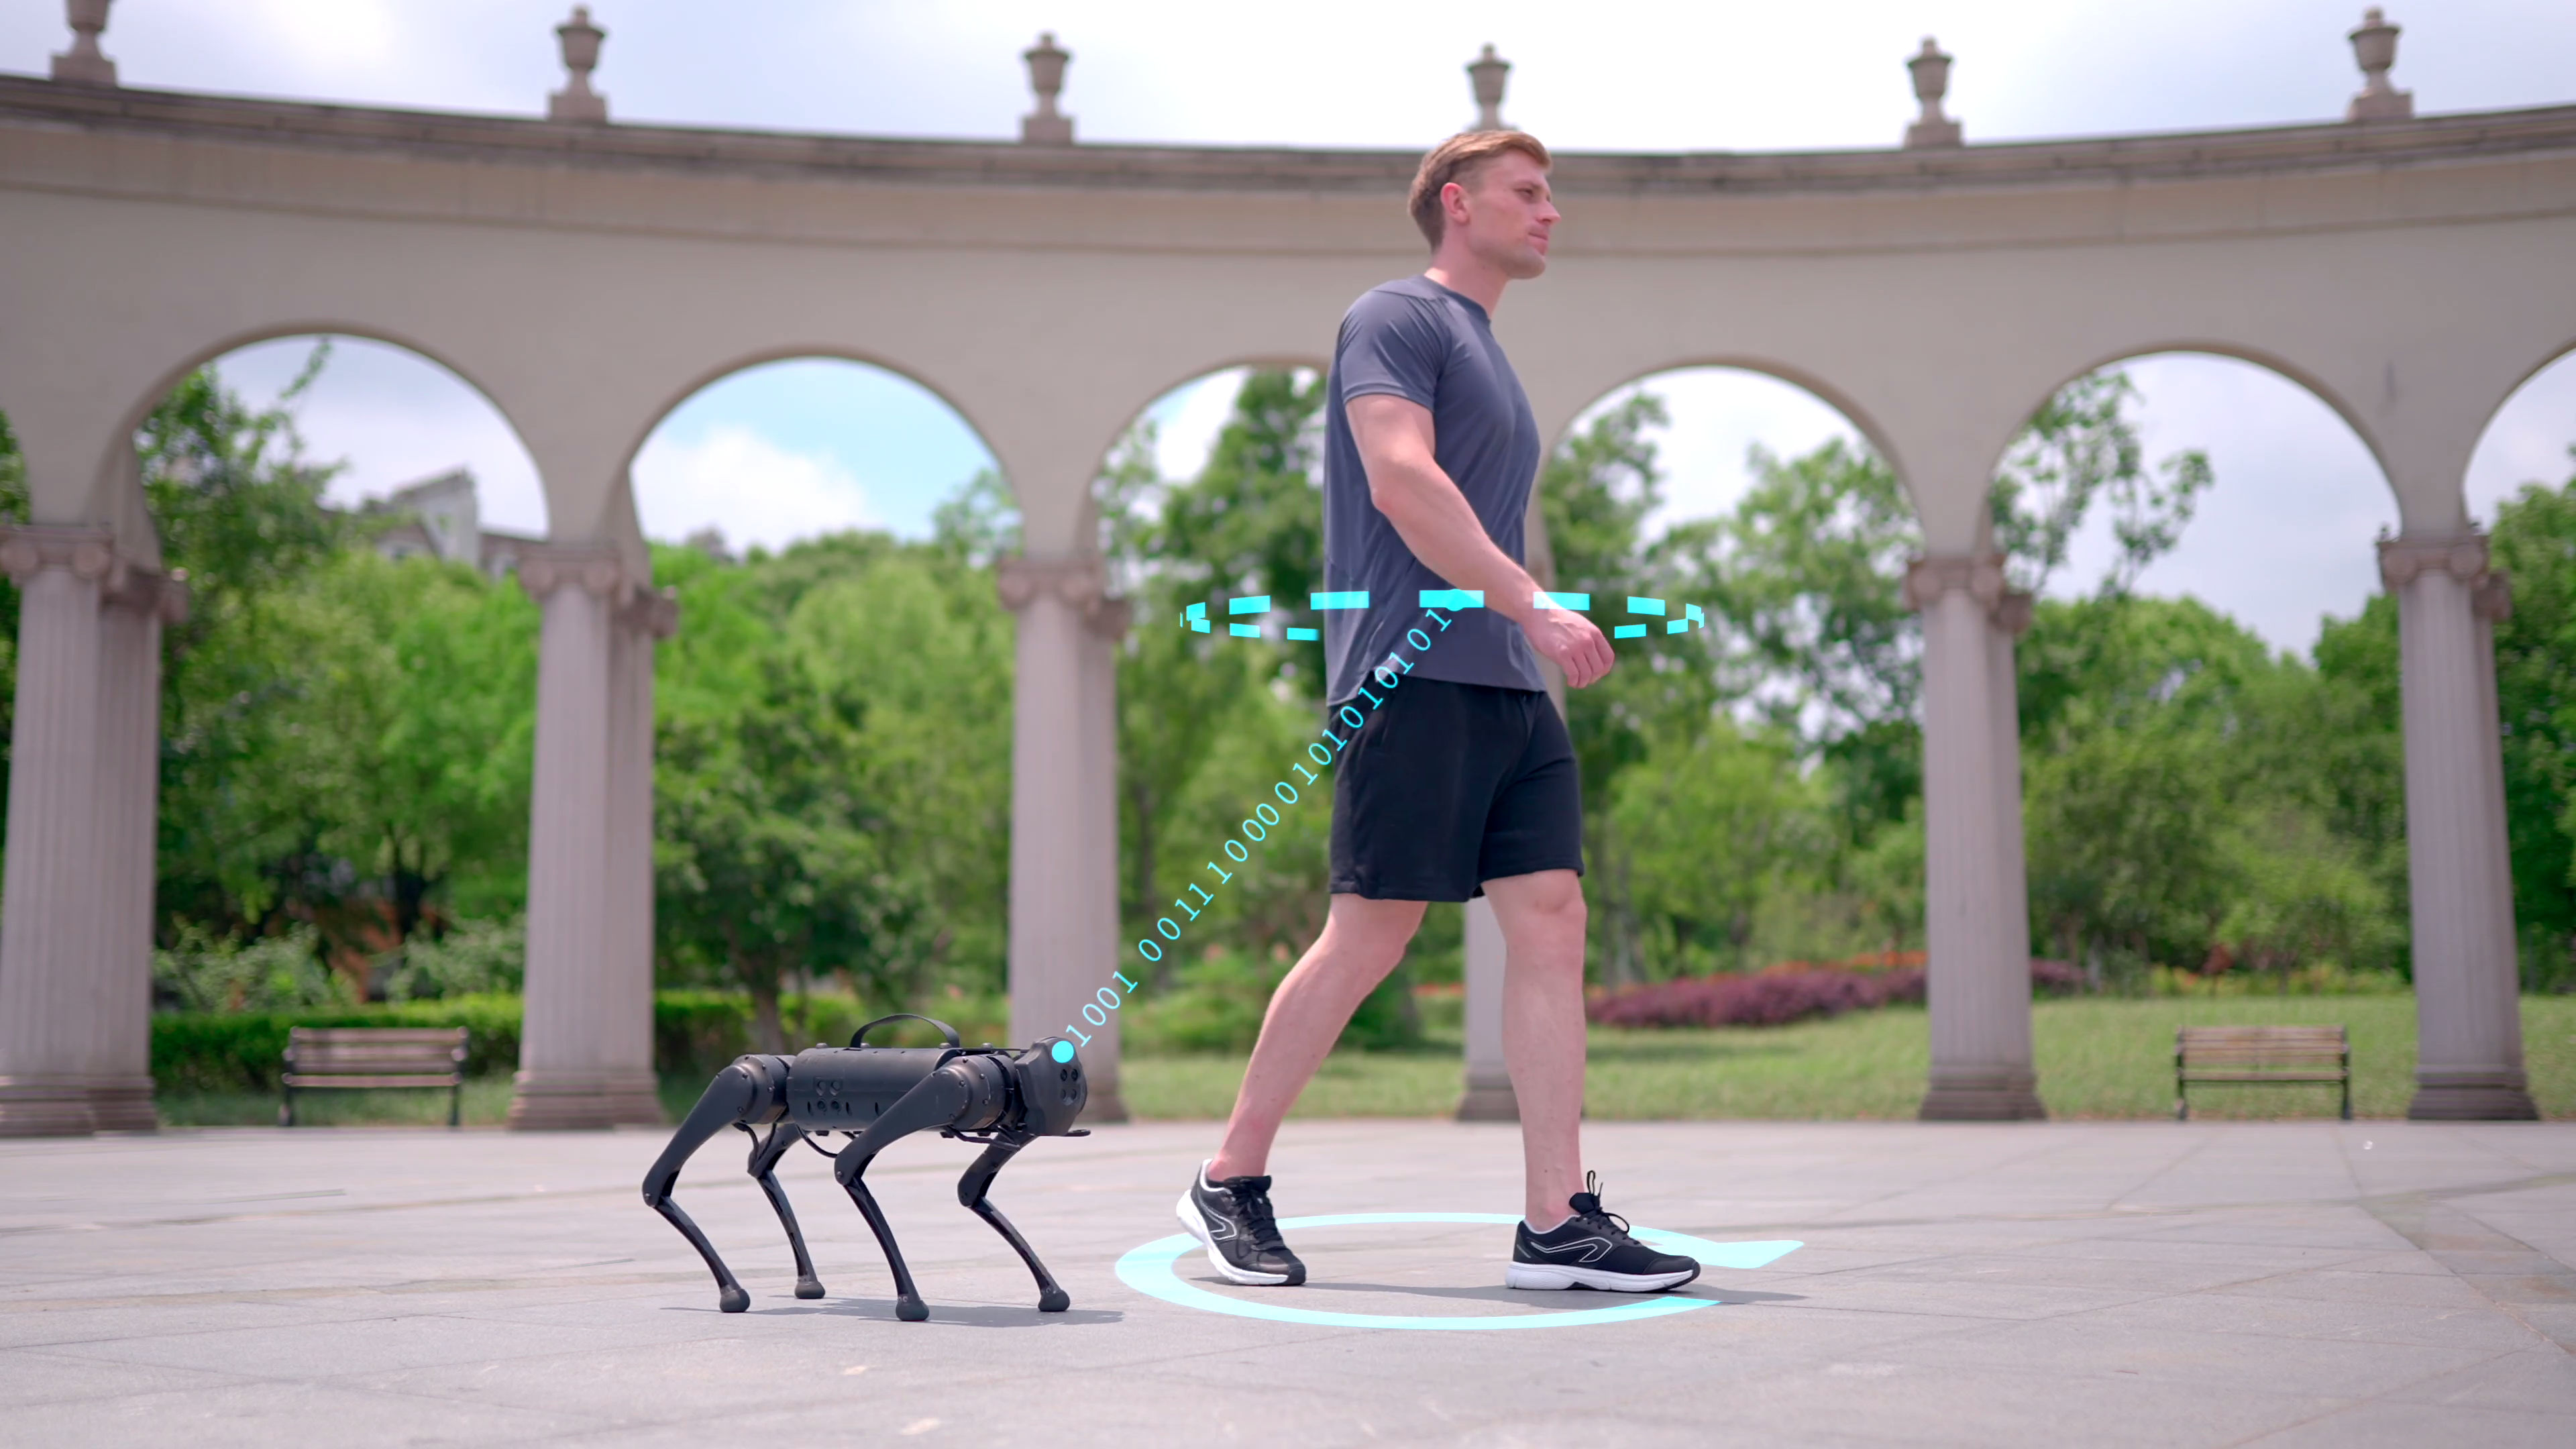 Unitree Robotics develops personal robot dogs that can jog with you